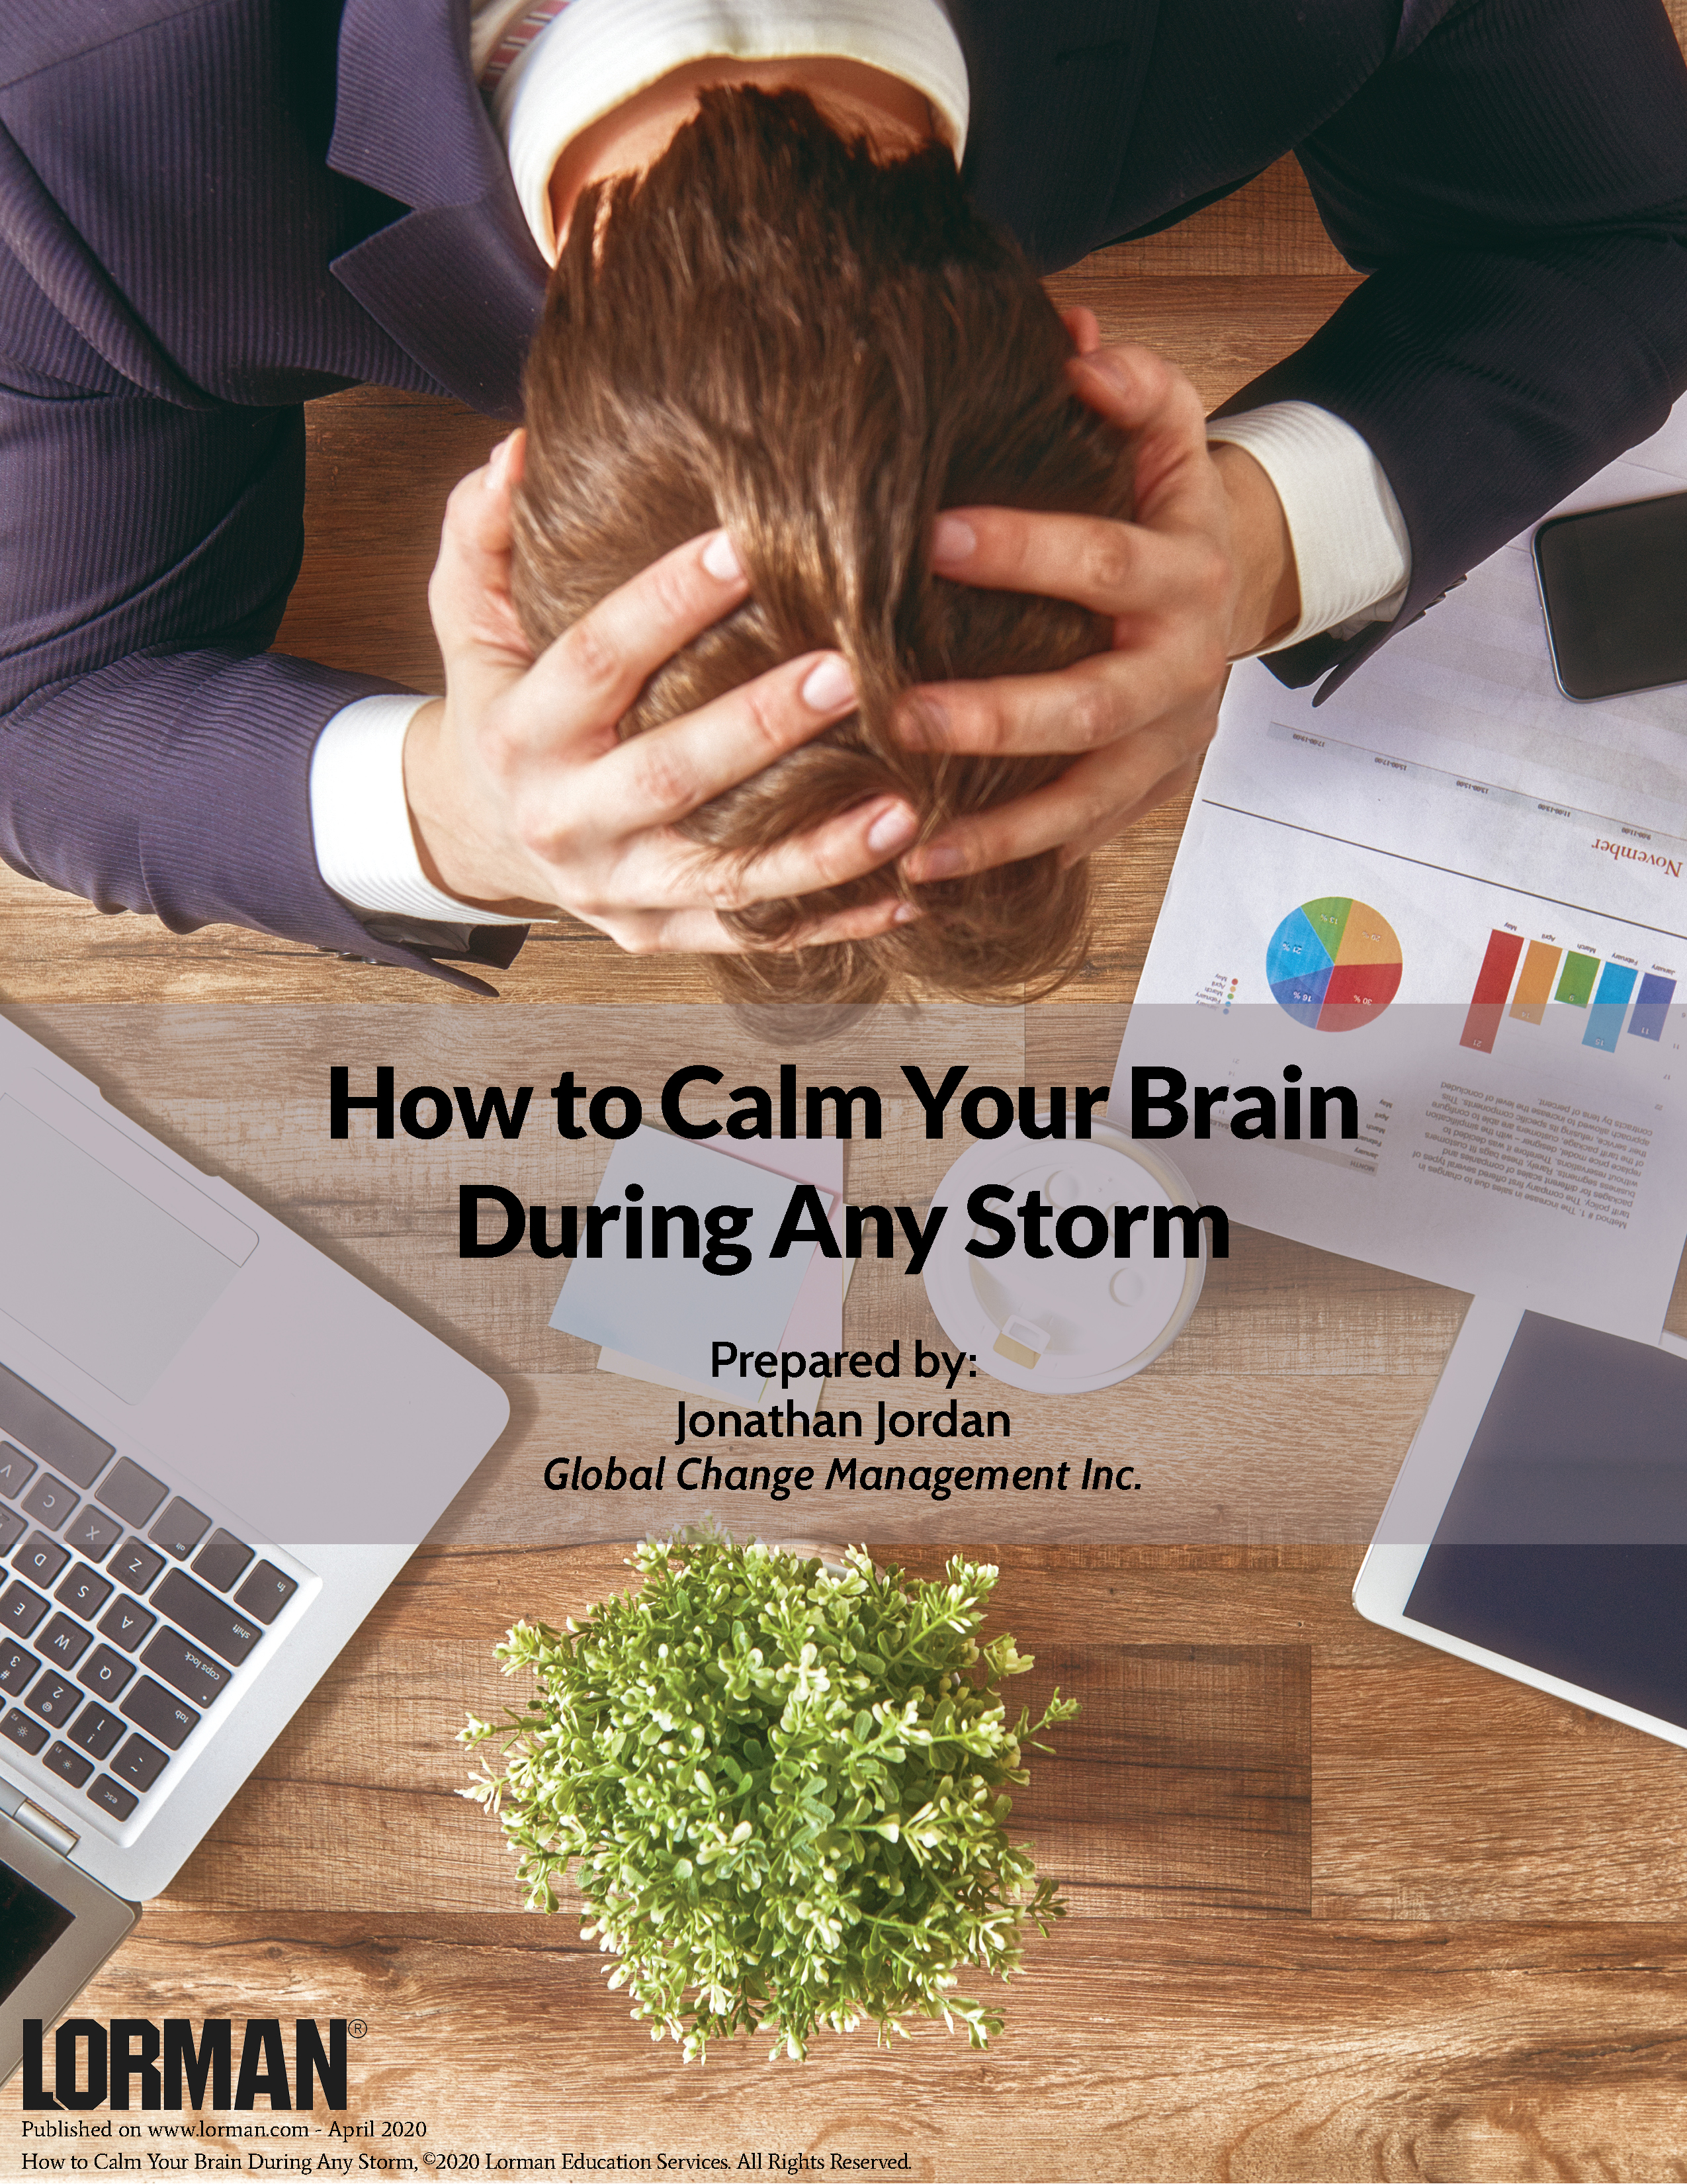 How to Calm Your Brain During Any Storm